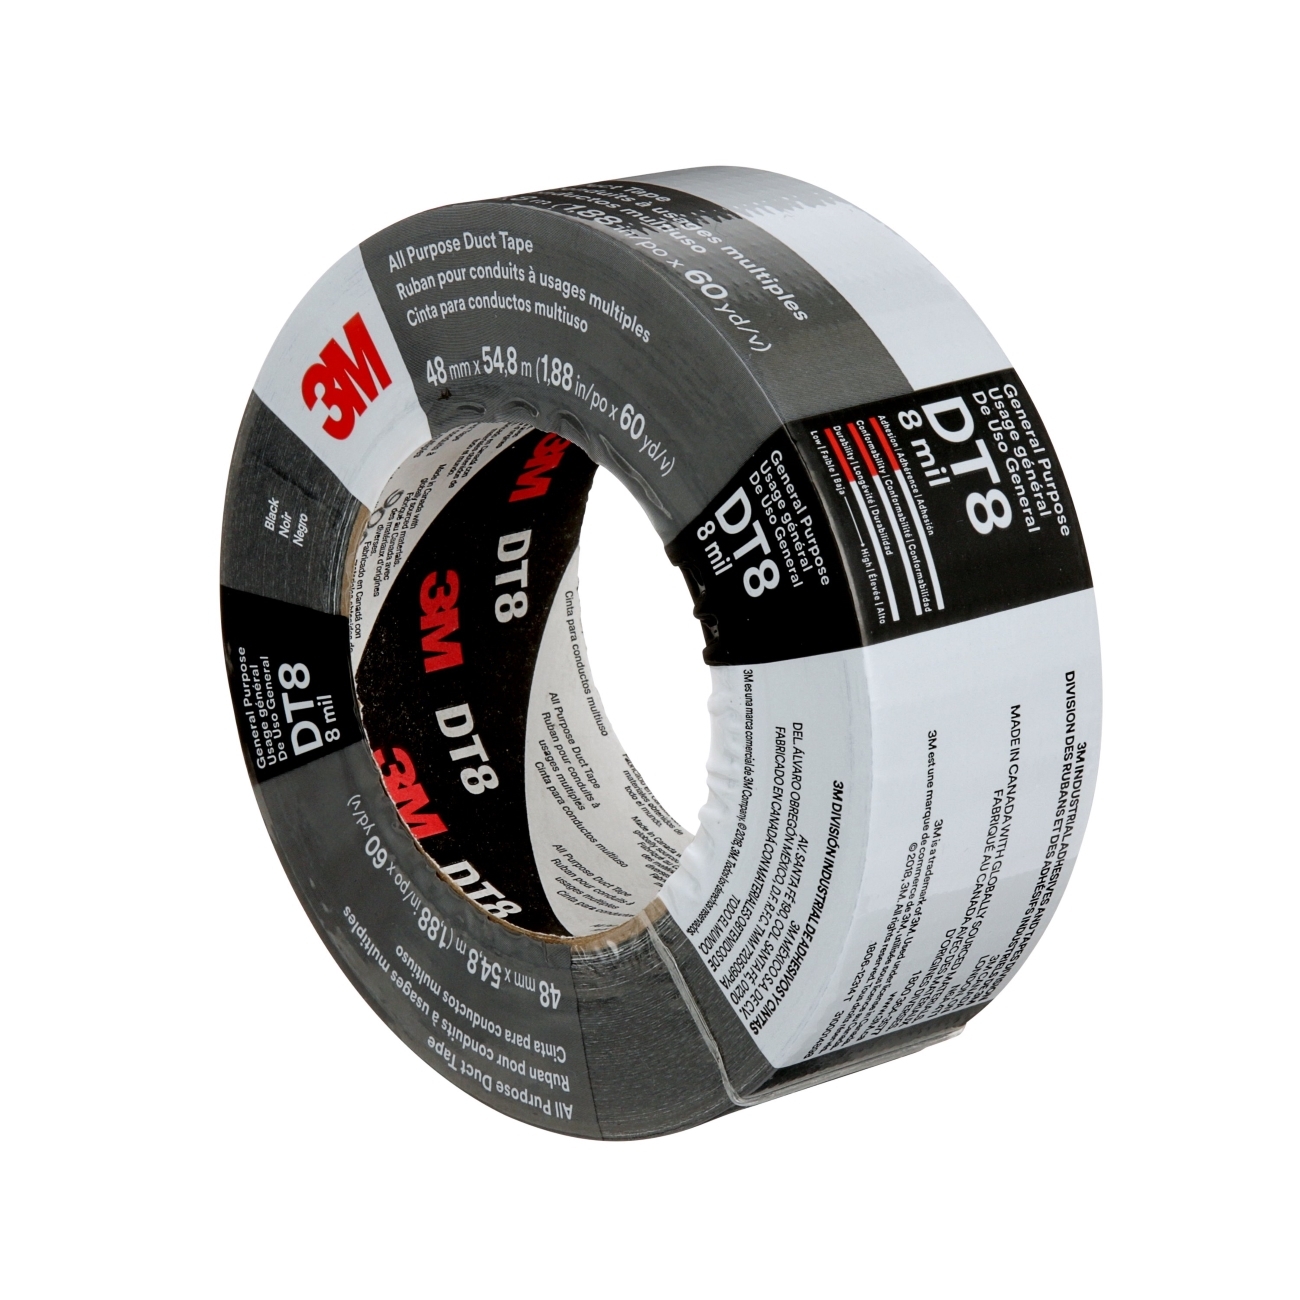 3M All-purpose adhesive tape DT8, silver, 48 mm x 55 m, 0.2 mm